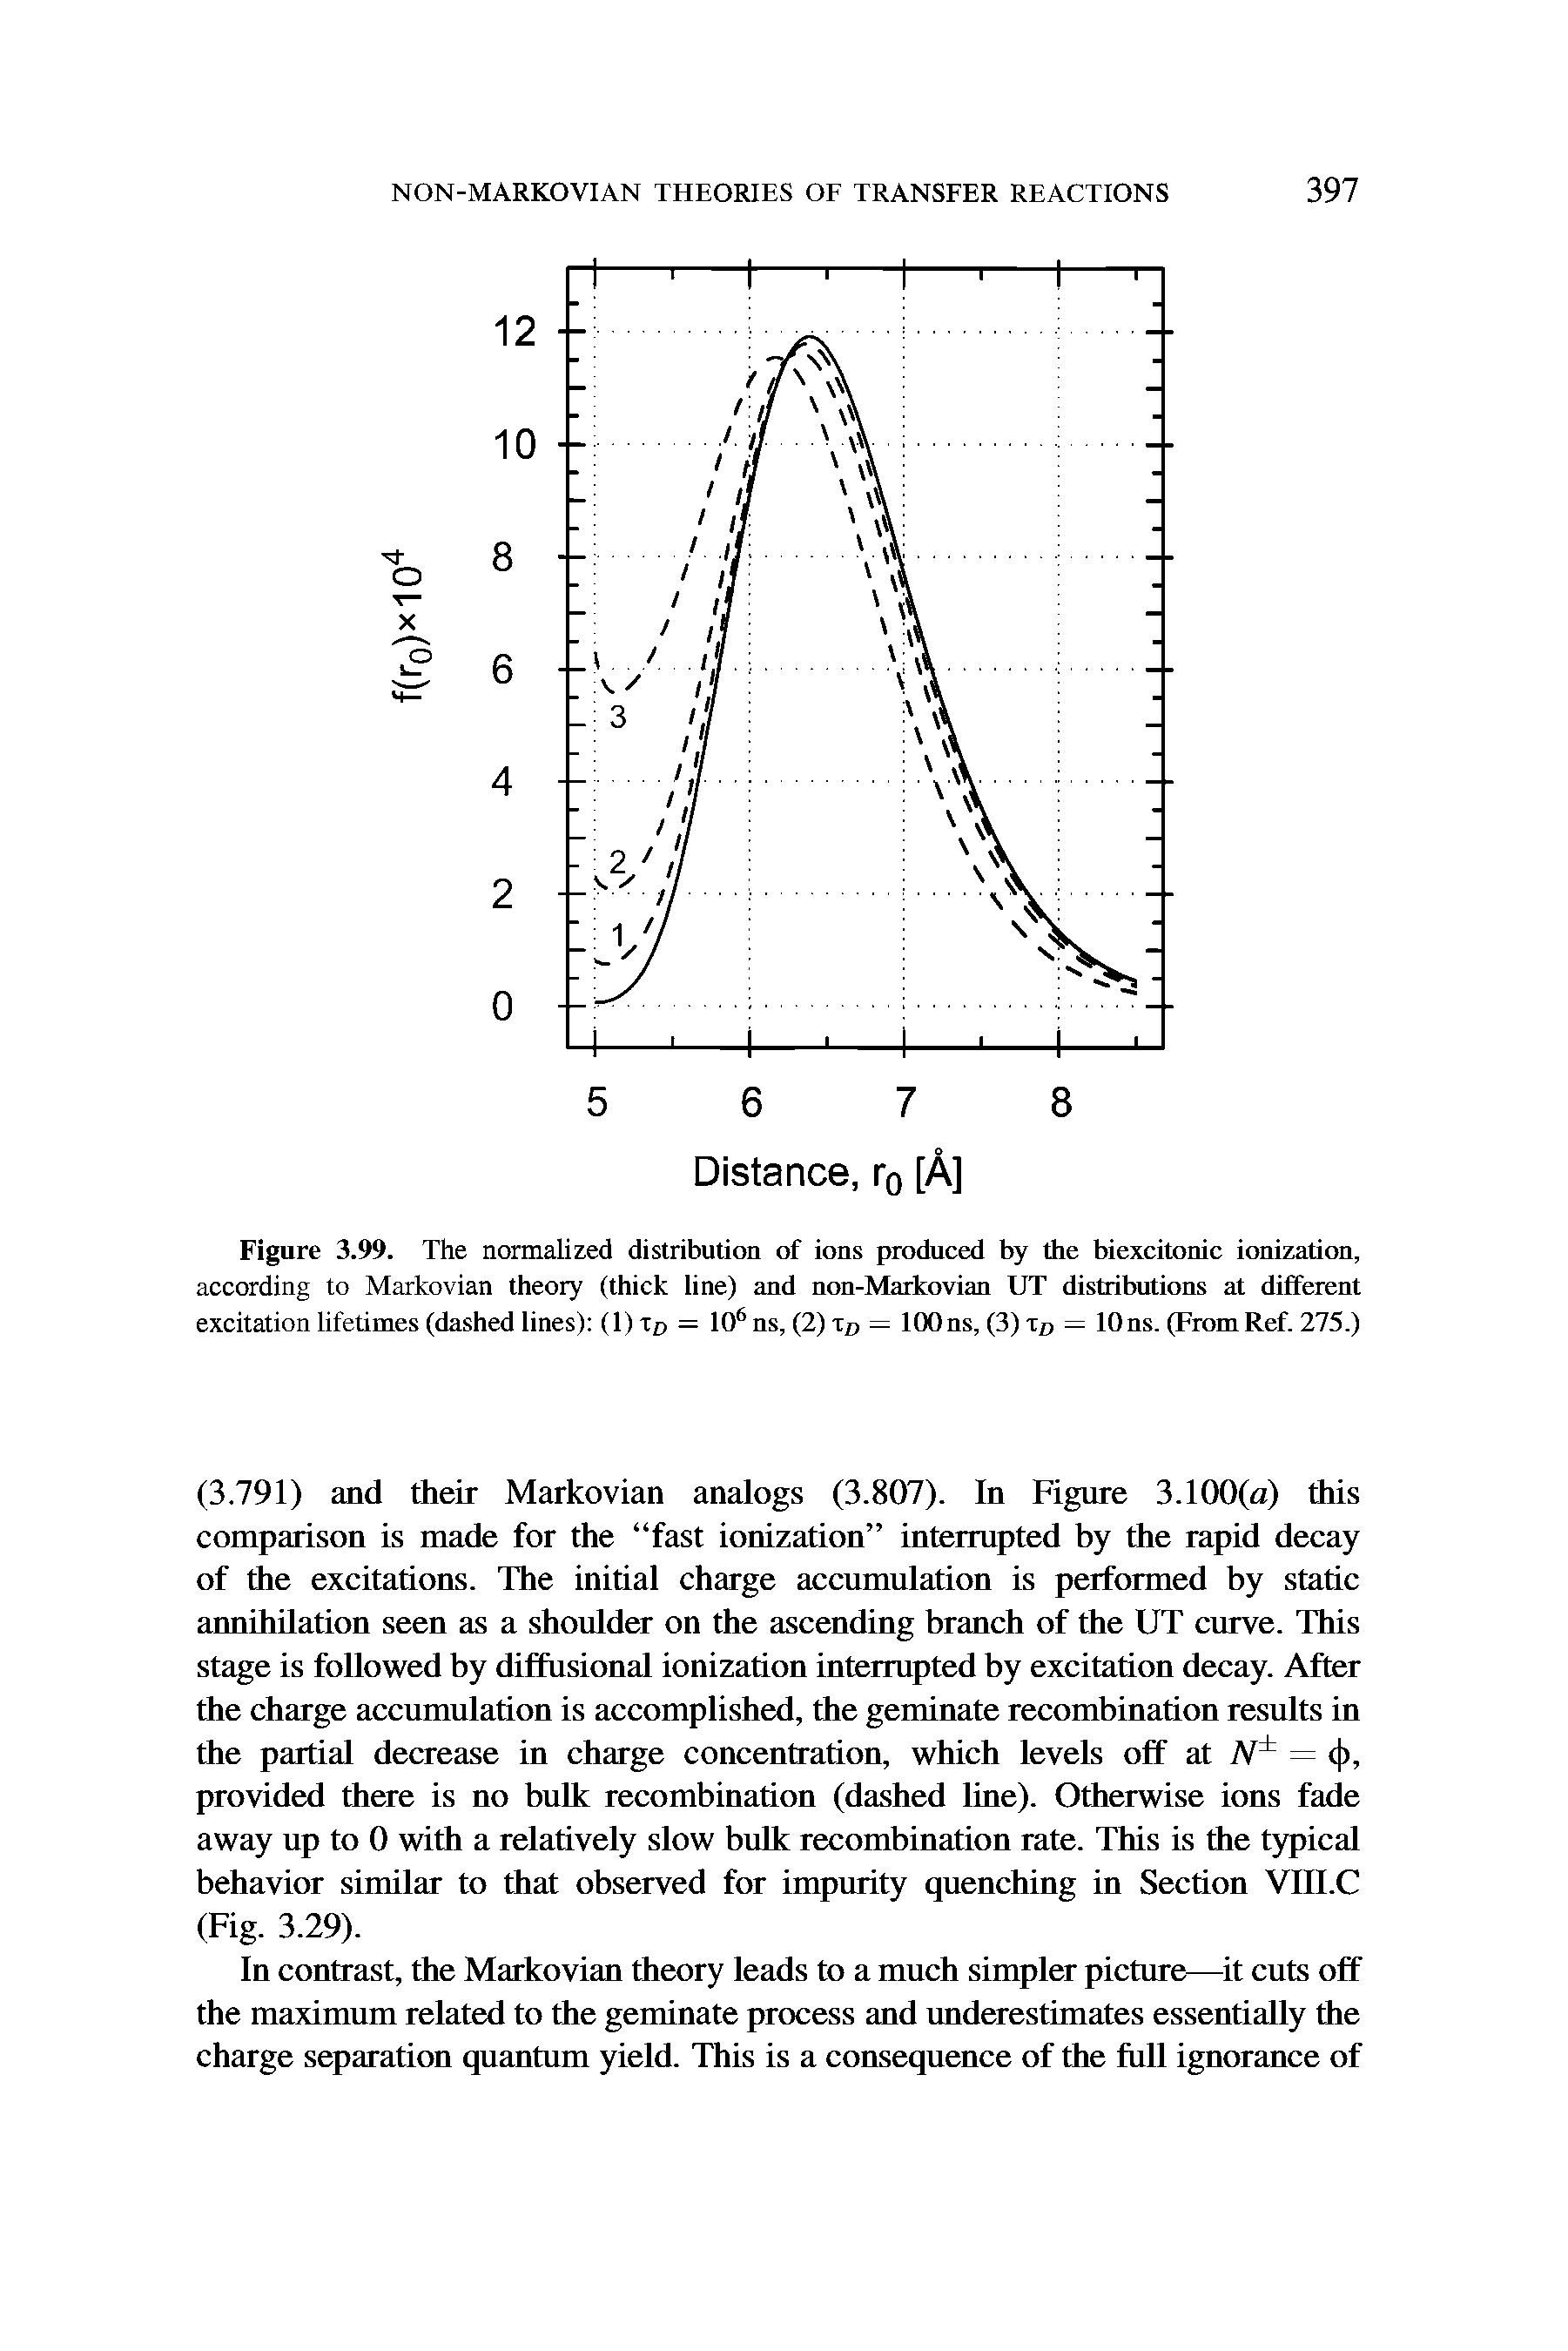 Figure 3.99. The normalized distribution of ions produced by the biexcitonic ionization, according to Markovian theory (thick line) and non-Markovian UT distributions at different excitation lifetimes (dashed lines) (1)td = 1()6 ns, (2) zD — 100ns,(3)td — 10 ns. (From Ref. 275.)...